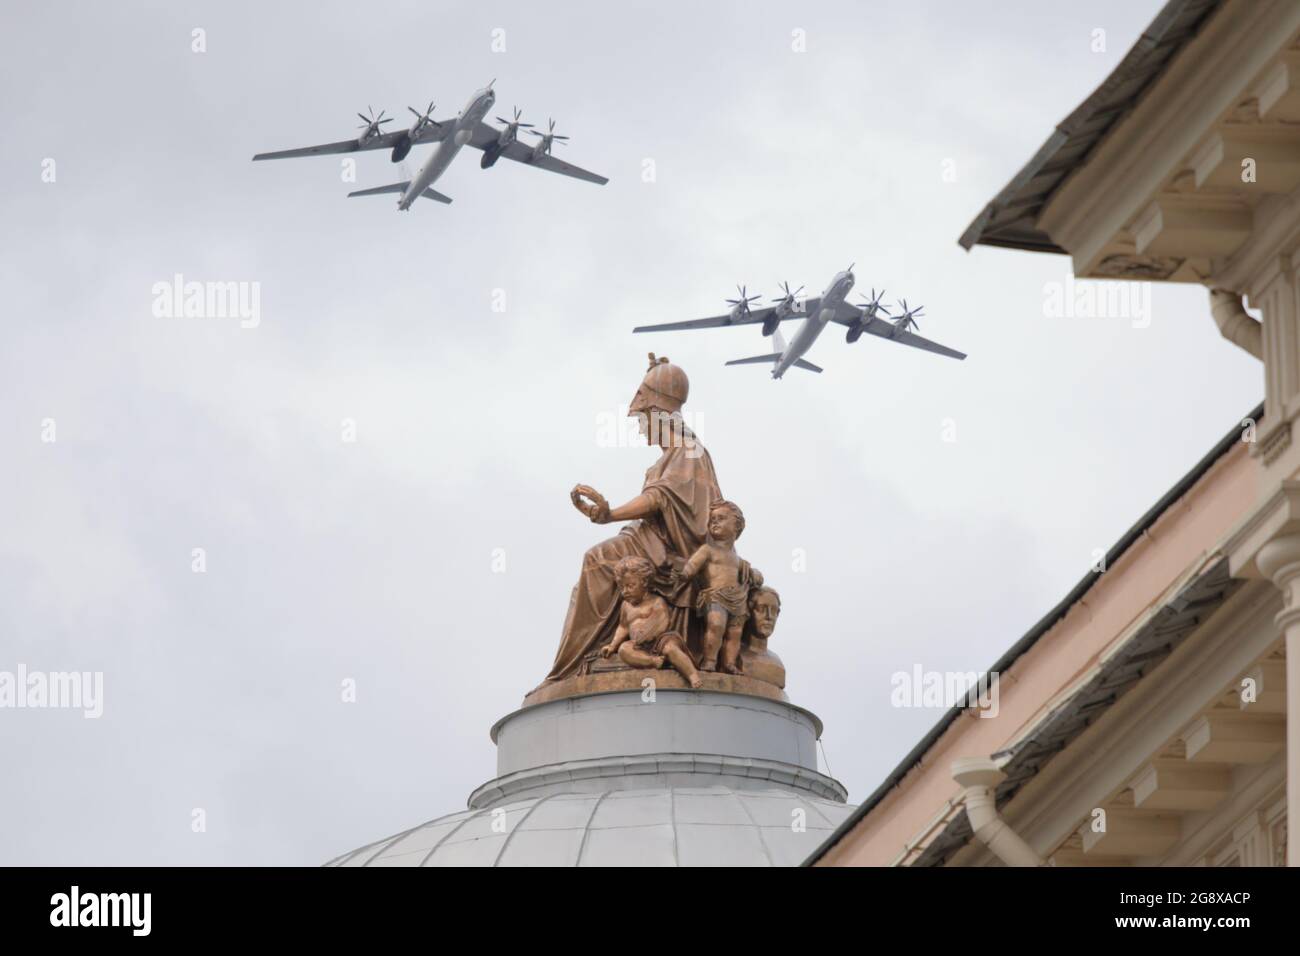 Tupolev Tu-142MZ Bear-F Russian maritime reconnaissance and anti-submarine warfare aircraft over the Minerva statue in St. Petersburg, Russia Stock Photo